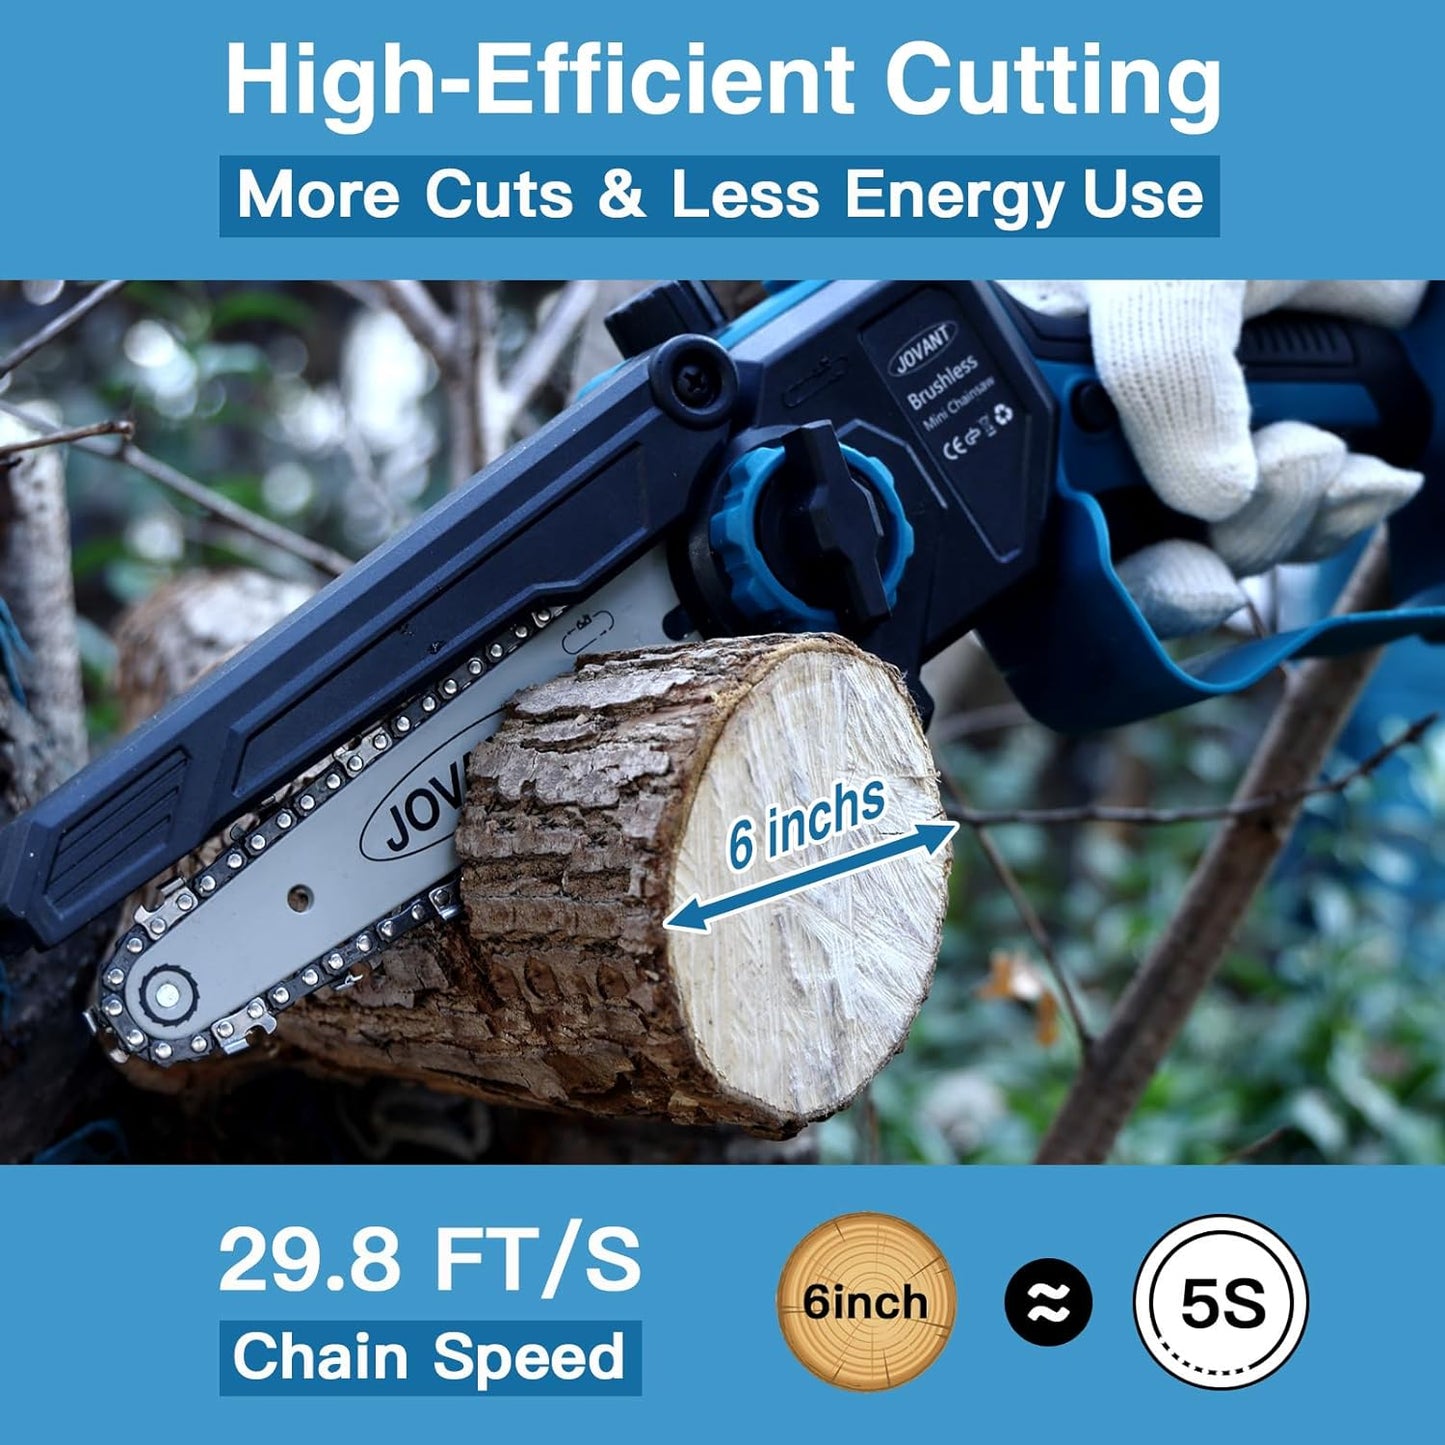 High-Efficient Cutting, More Cuts & Less Energy Use;  Chain Speed: 29.8 FT/S ; 6inch in 5S